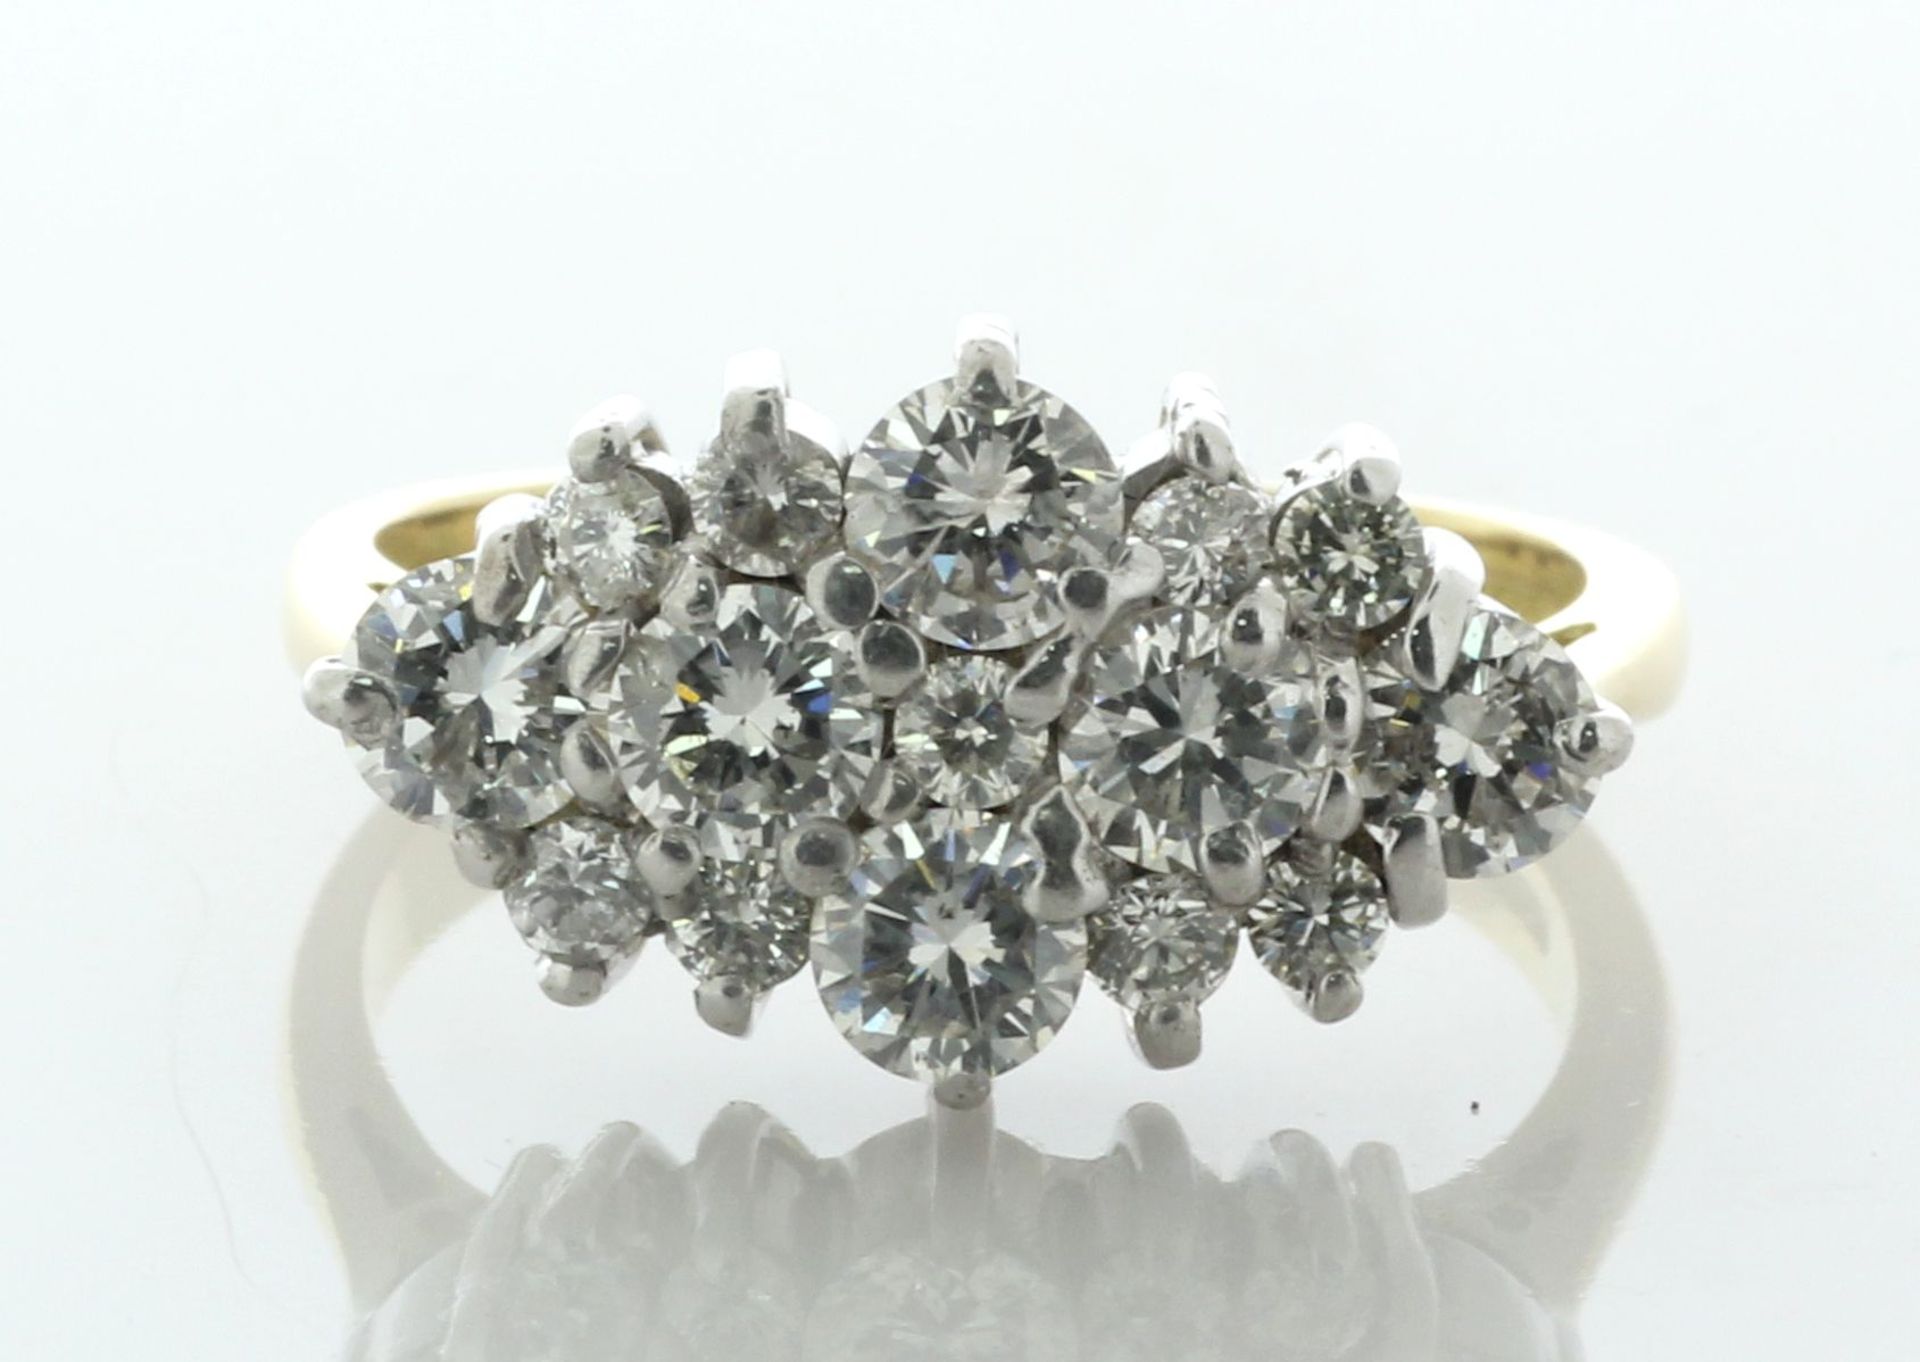 18ct Yellow Gold Boat Shape Cluster Diamond Ring 2.00 Carats - Valued By AGI £6,655.00 - The top